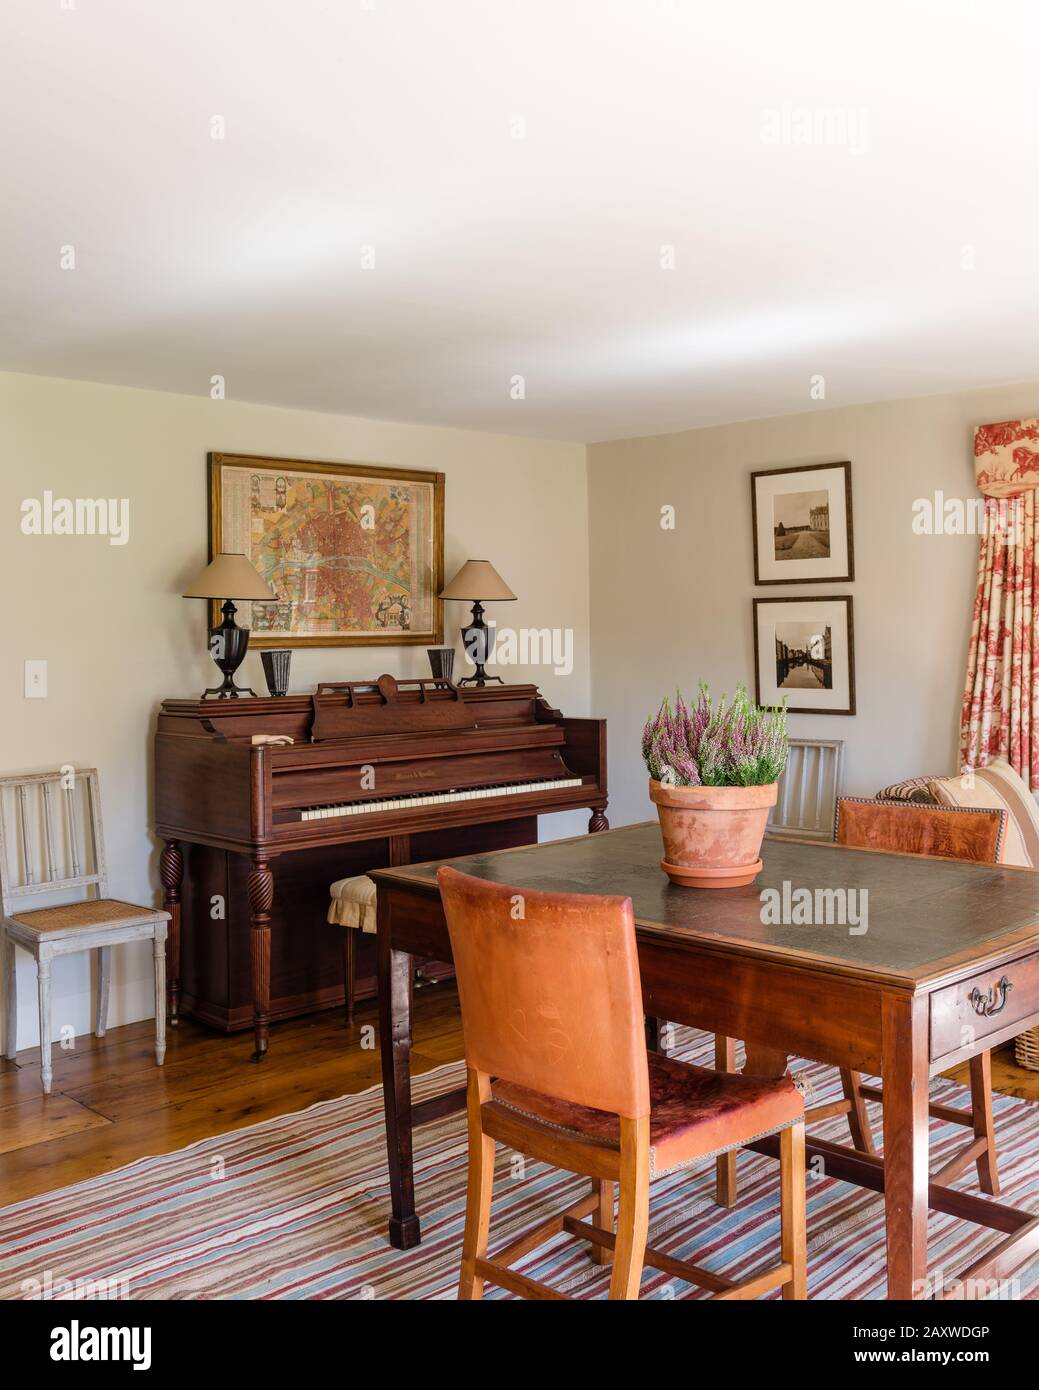 Desk and piano in country style room Stock Photo